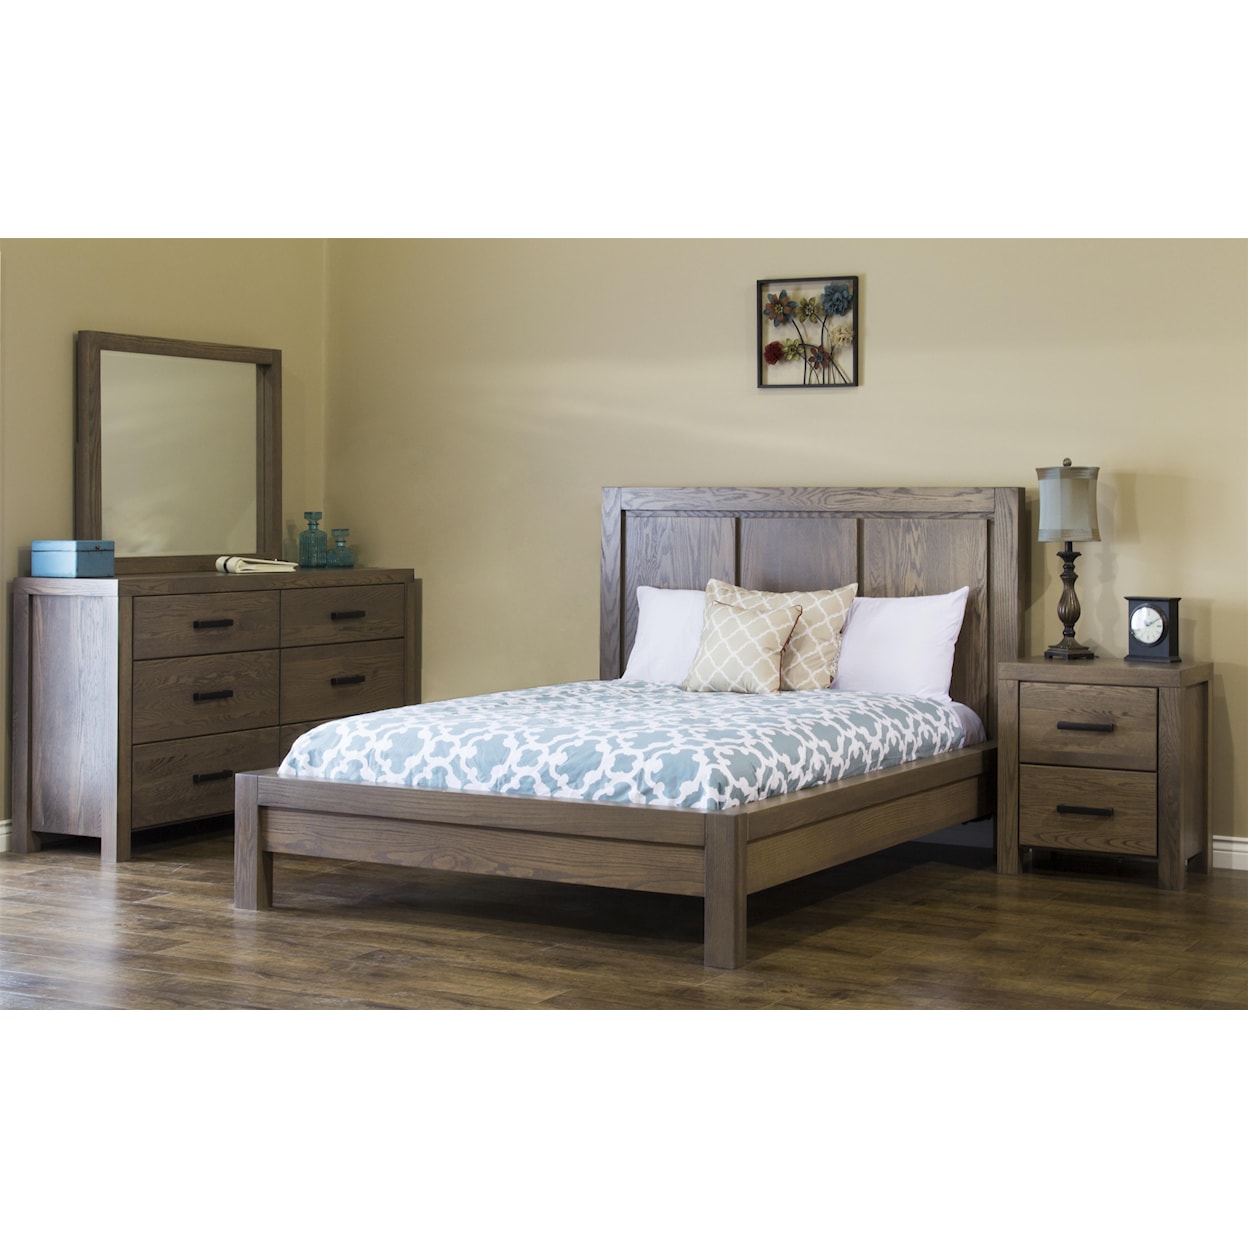 L.J. Gascho Furniture Canyon Lake 6 Drawer Dresser and Mirror with Wood Frame